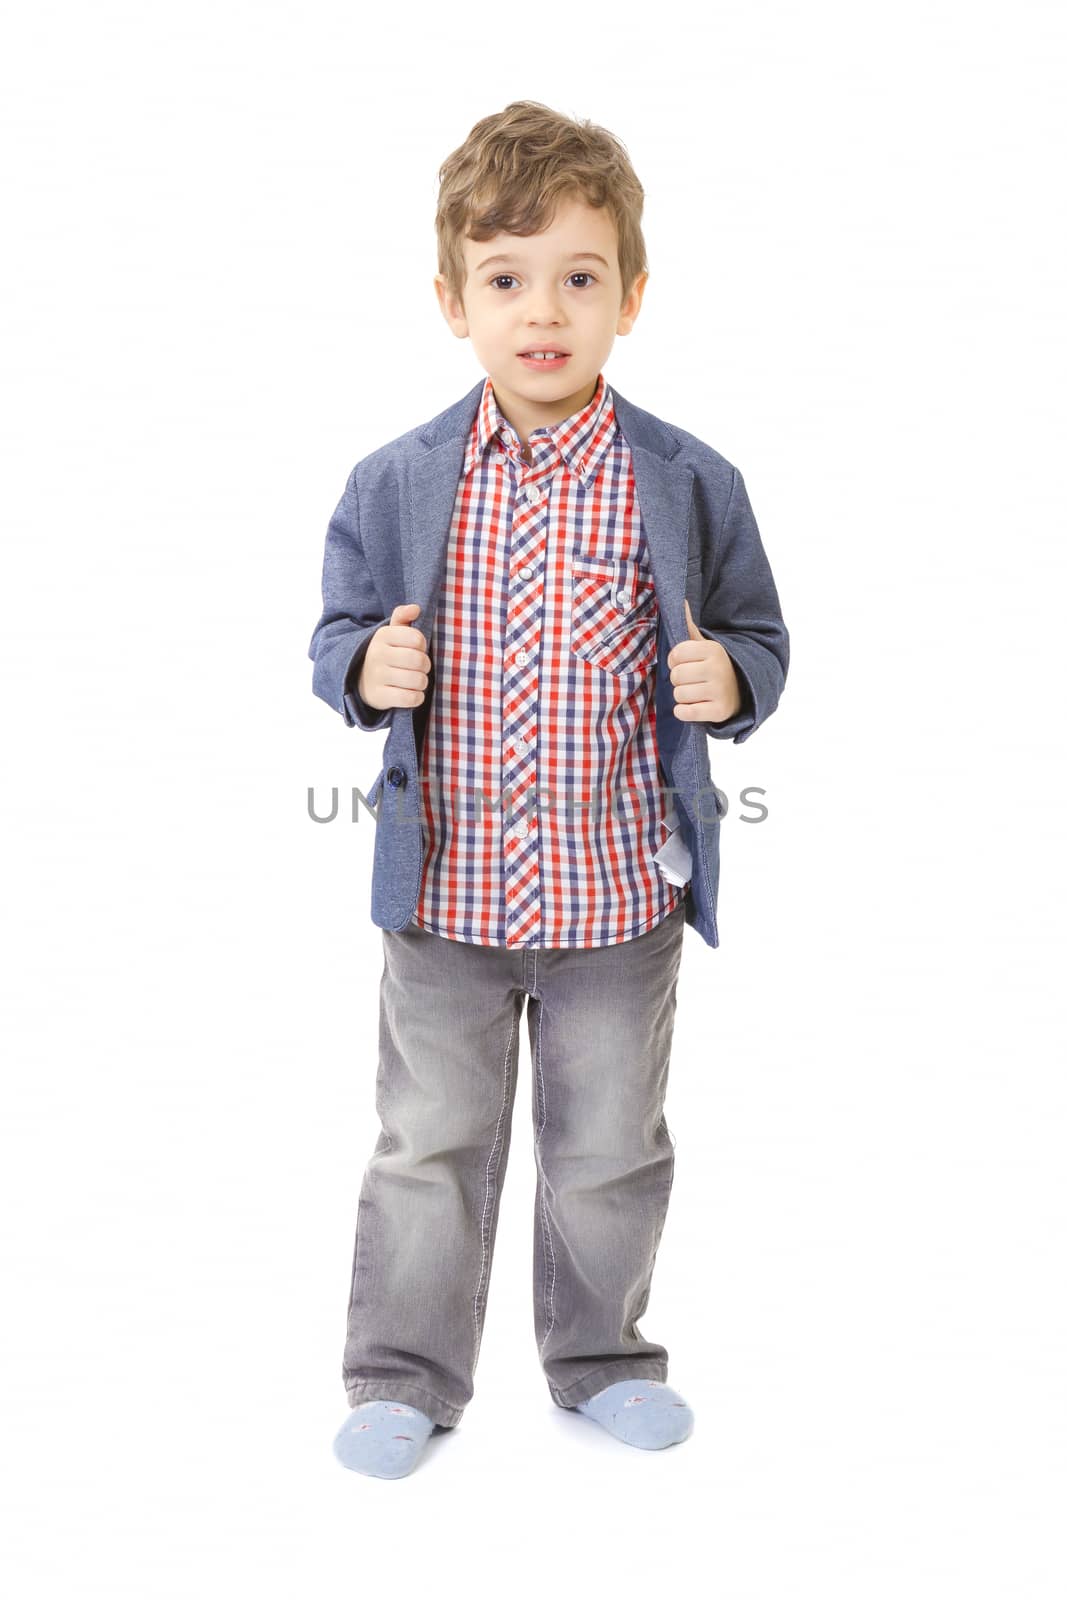 little boy with jacket and shirt by manaemedia